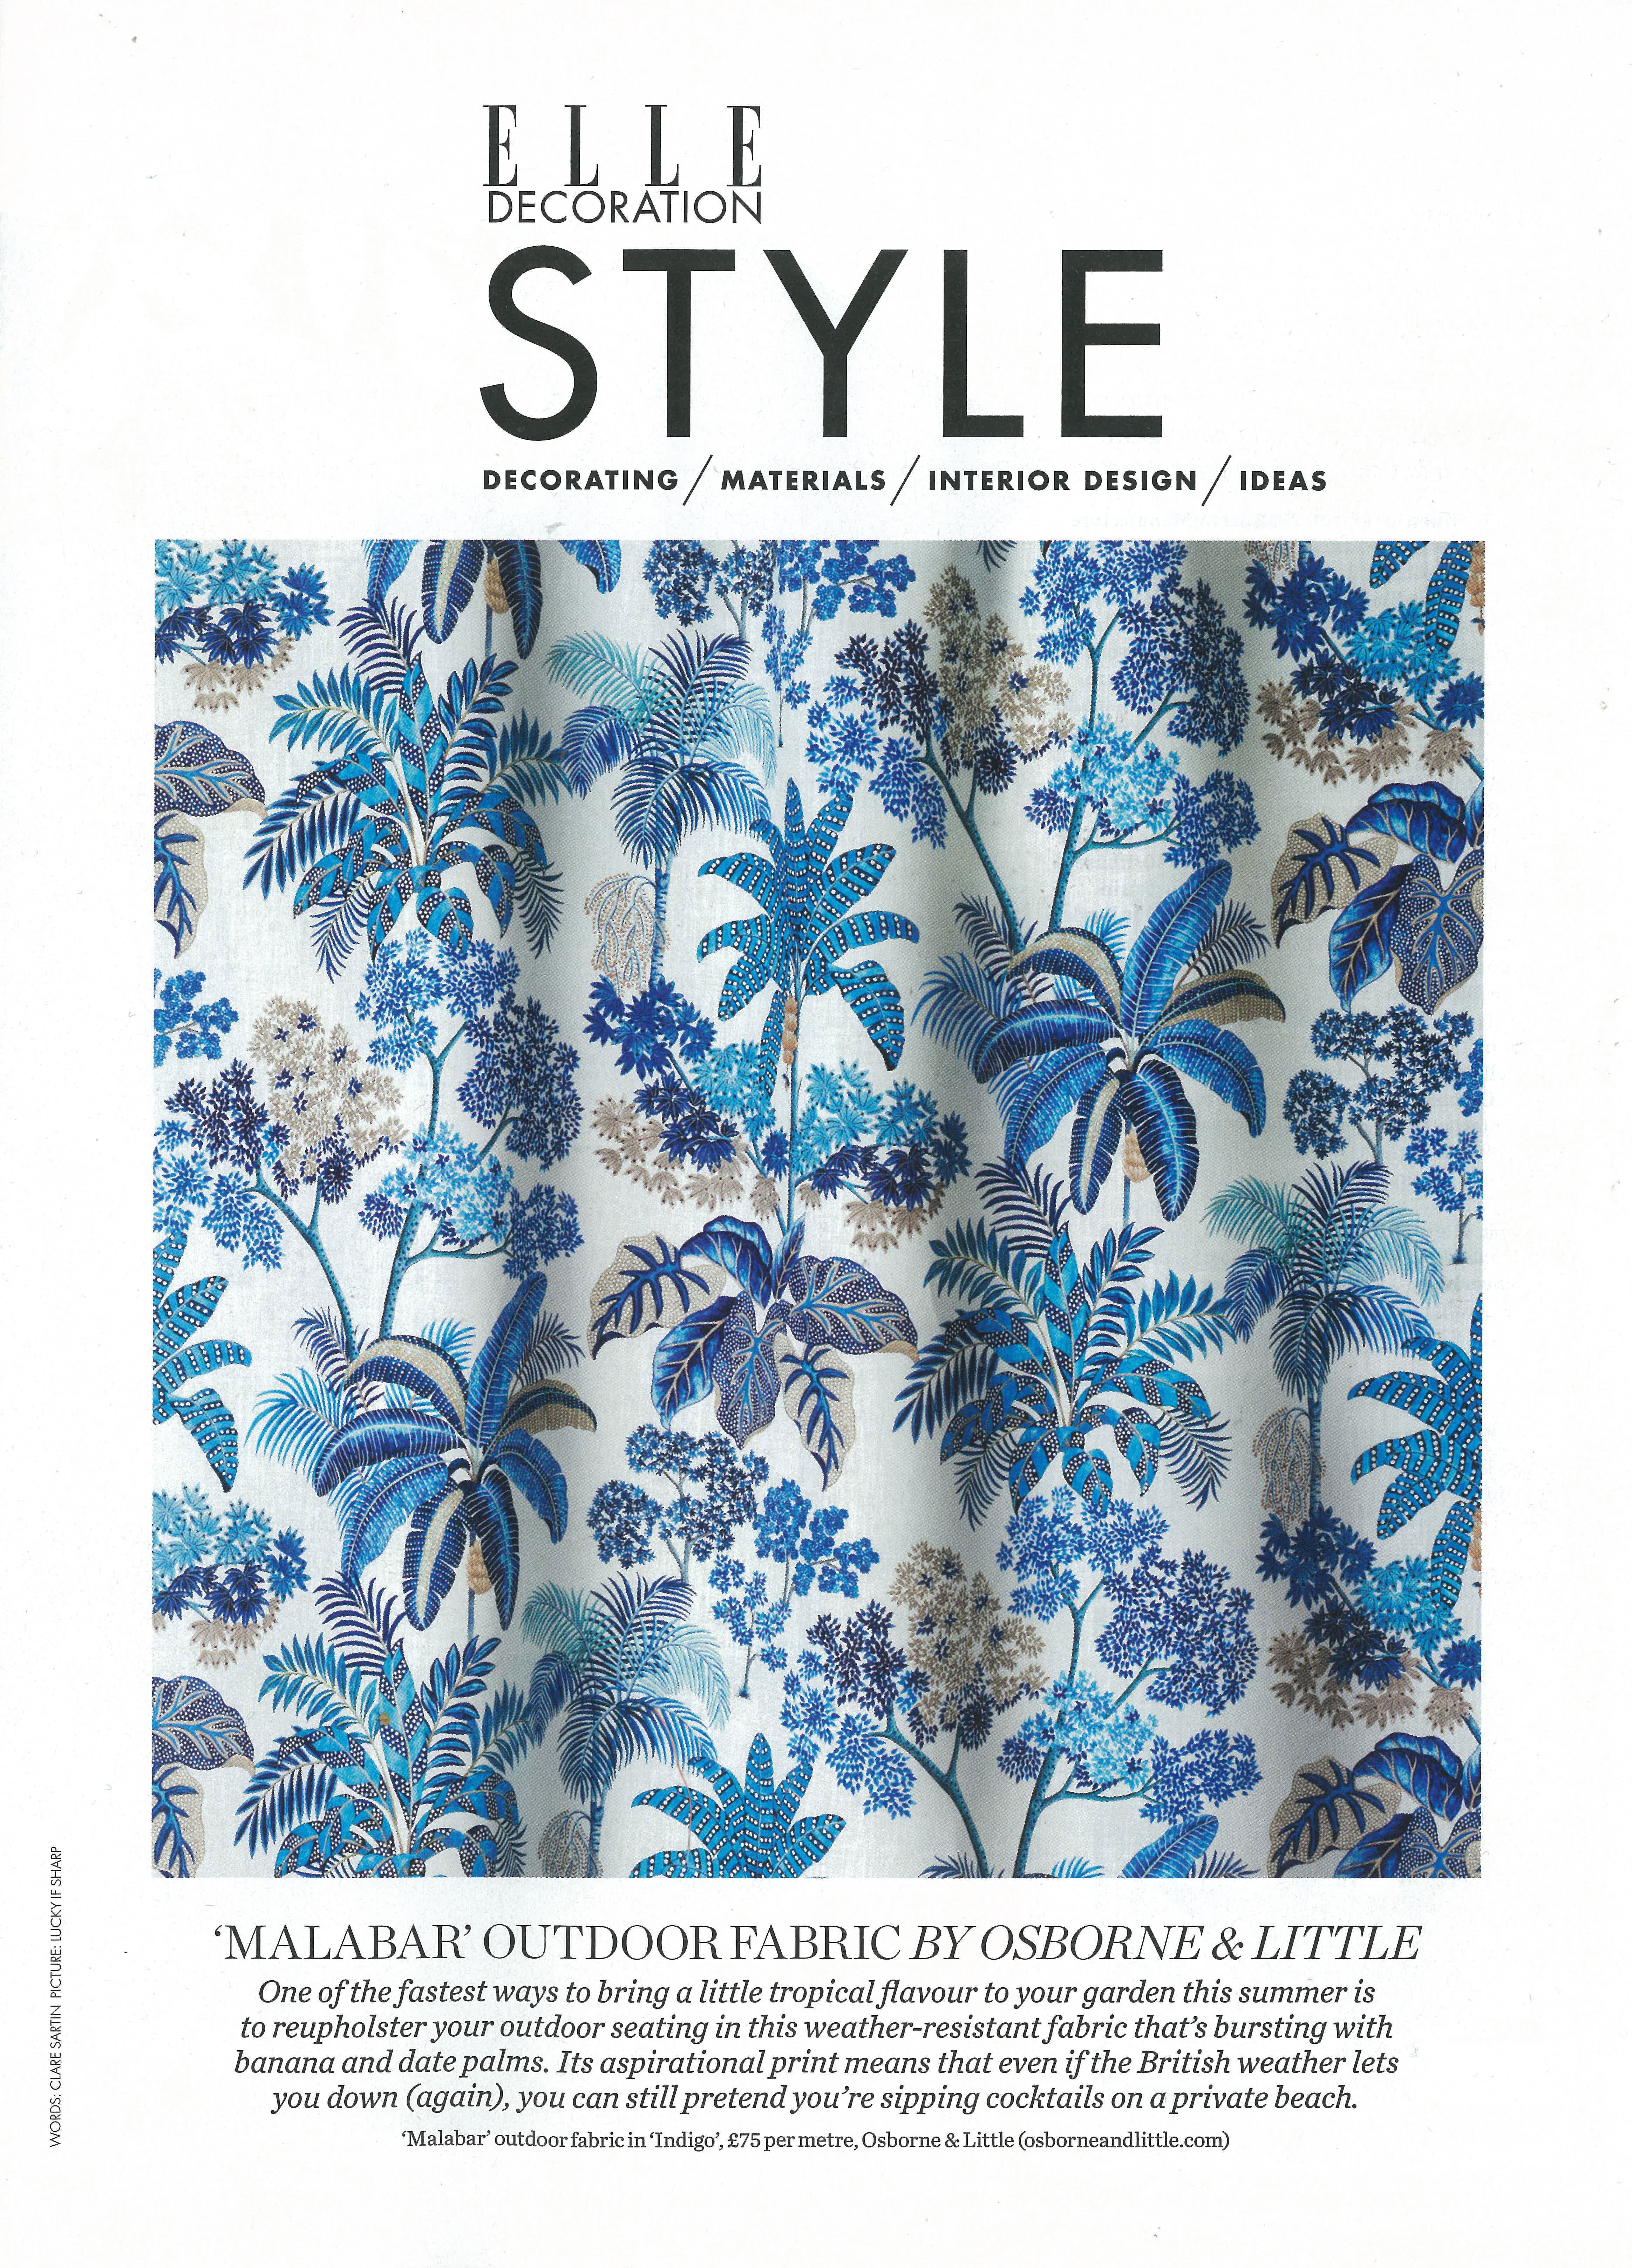 Blue malabar outdoor fabric in Elle decoration uk Style section